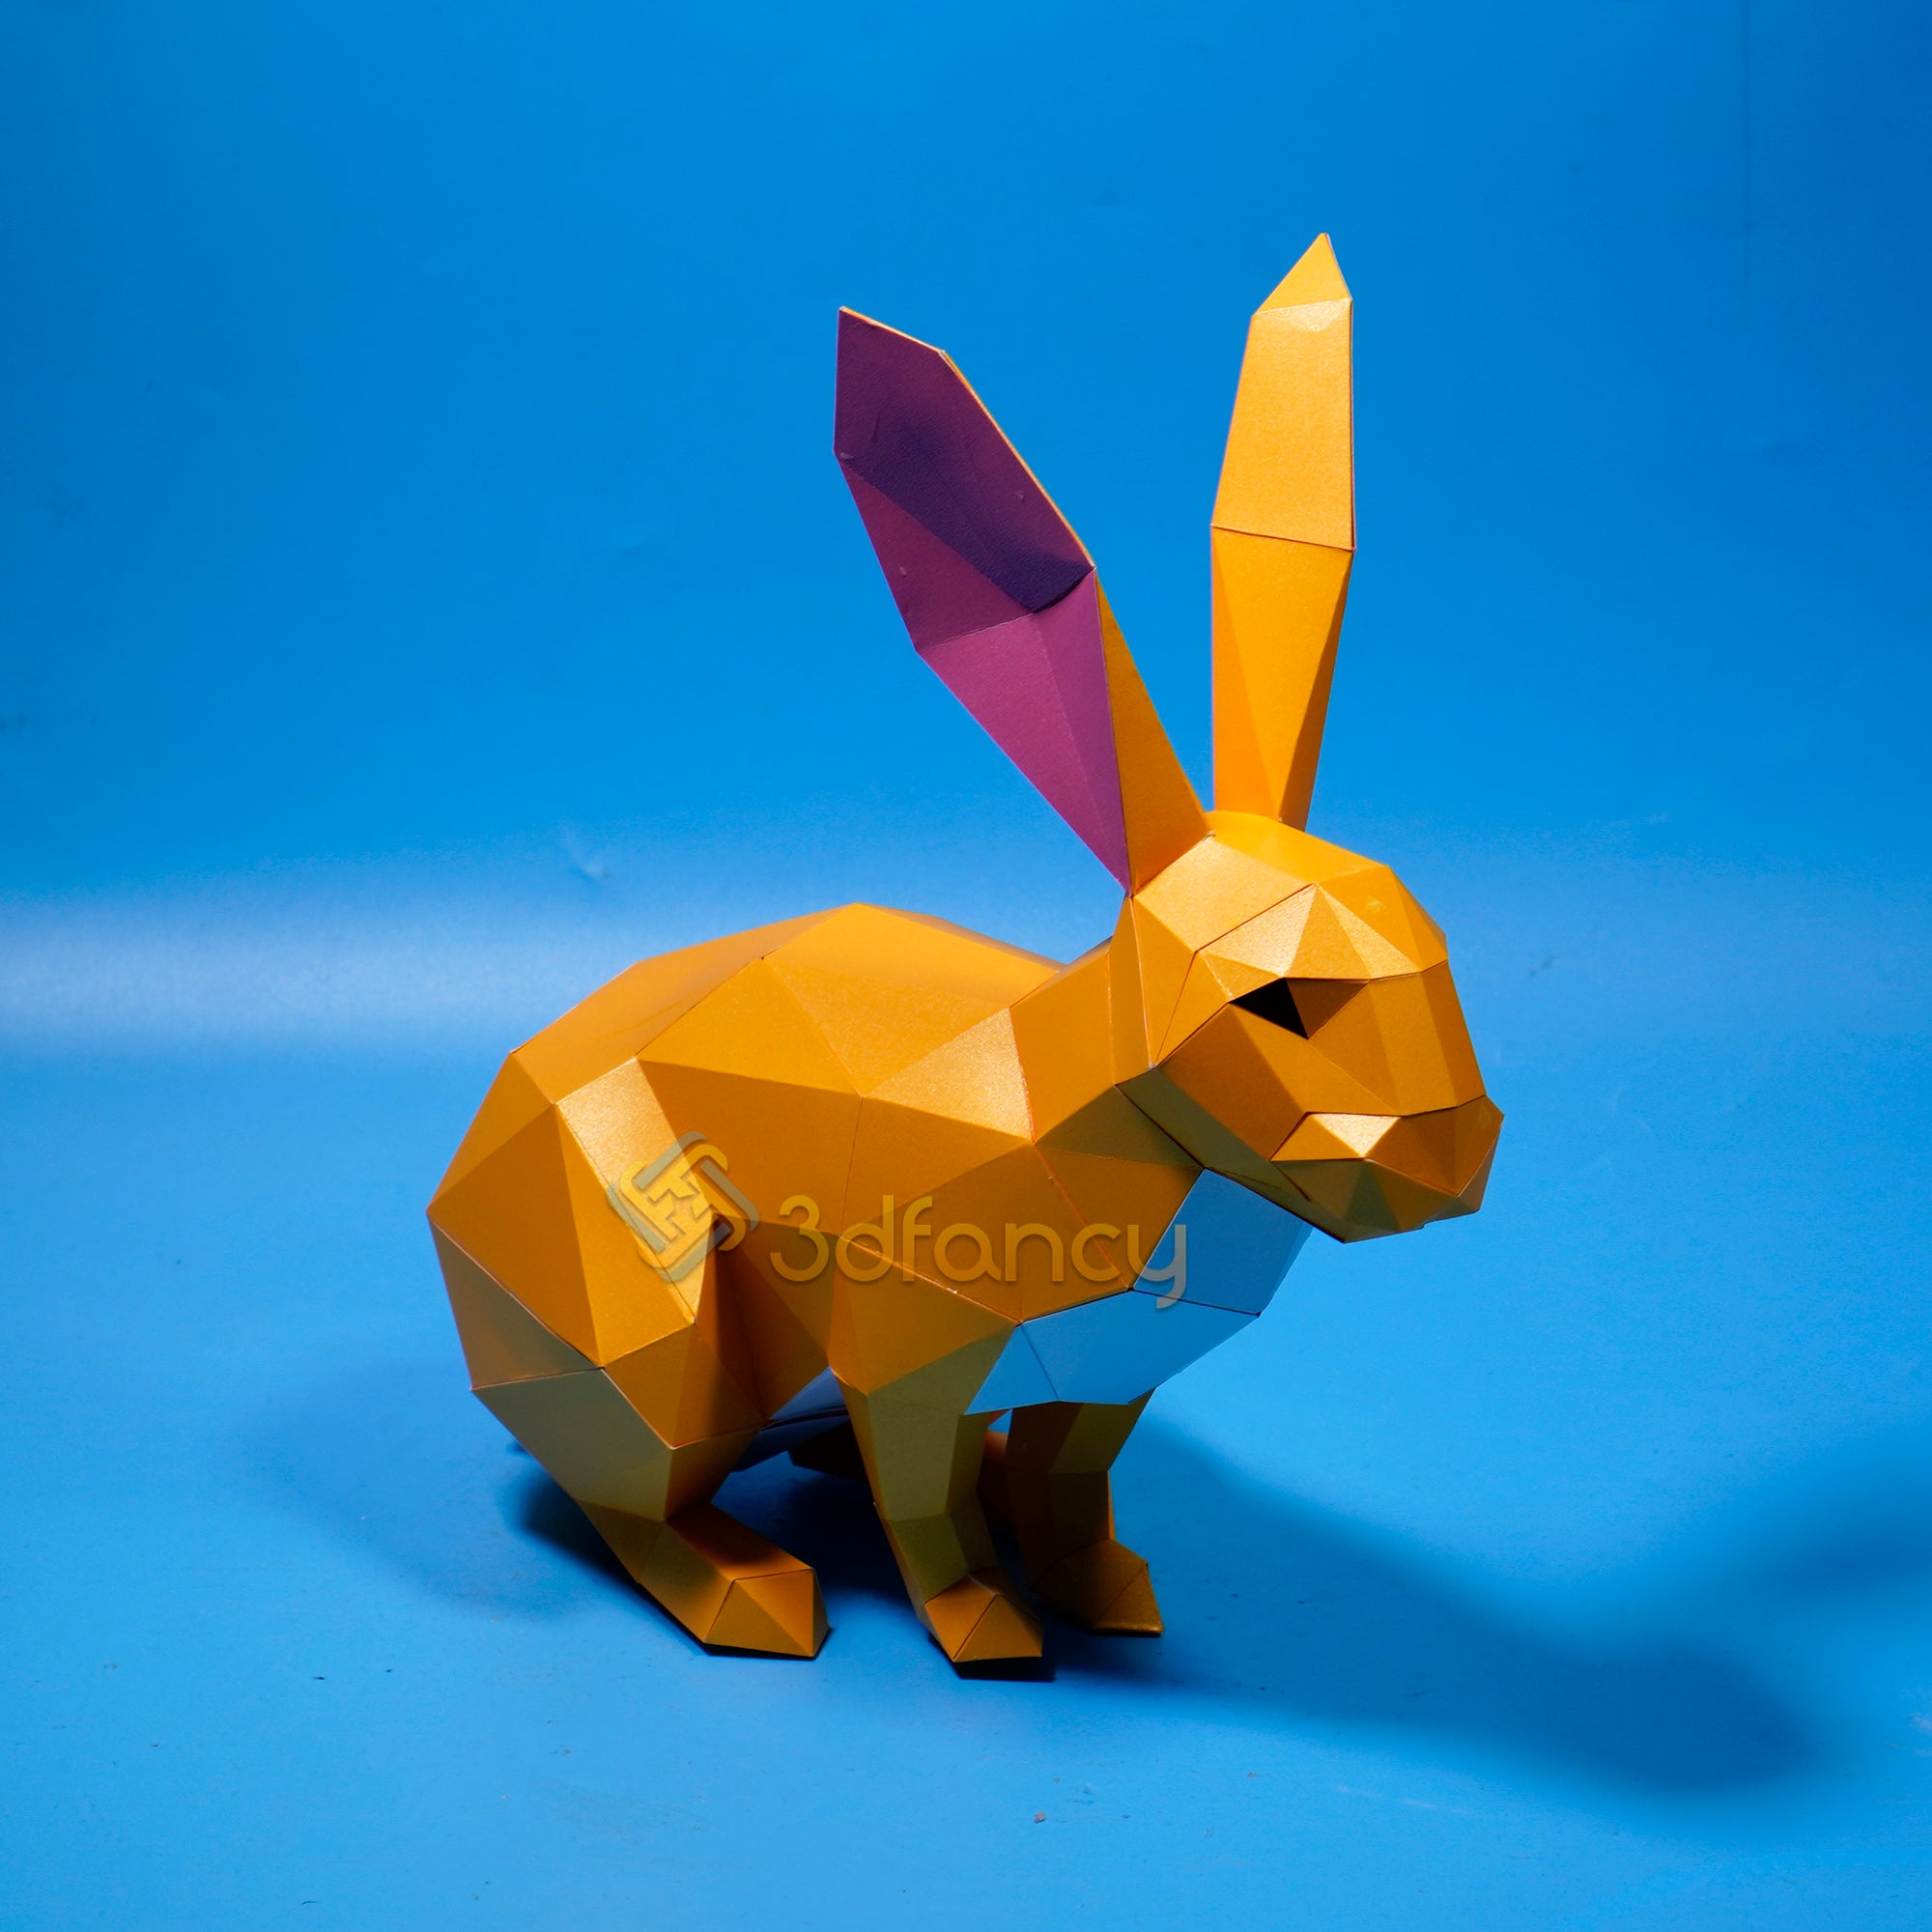 Low poly Rabbit Papercraft PDF, SVG Template For Creating 3D Rabbit V1, 3D Rabbit For Easter Decor